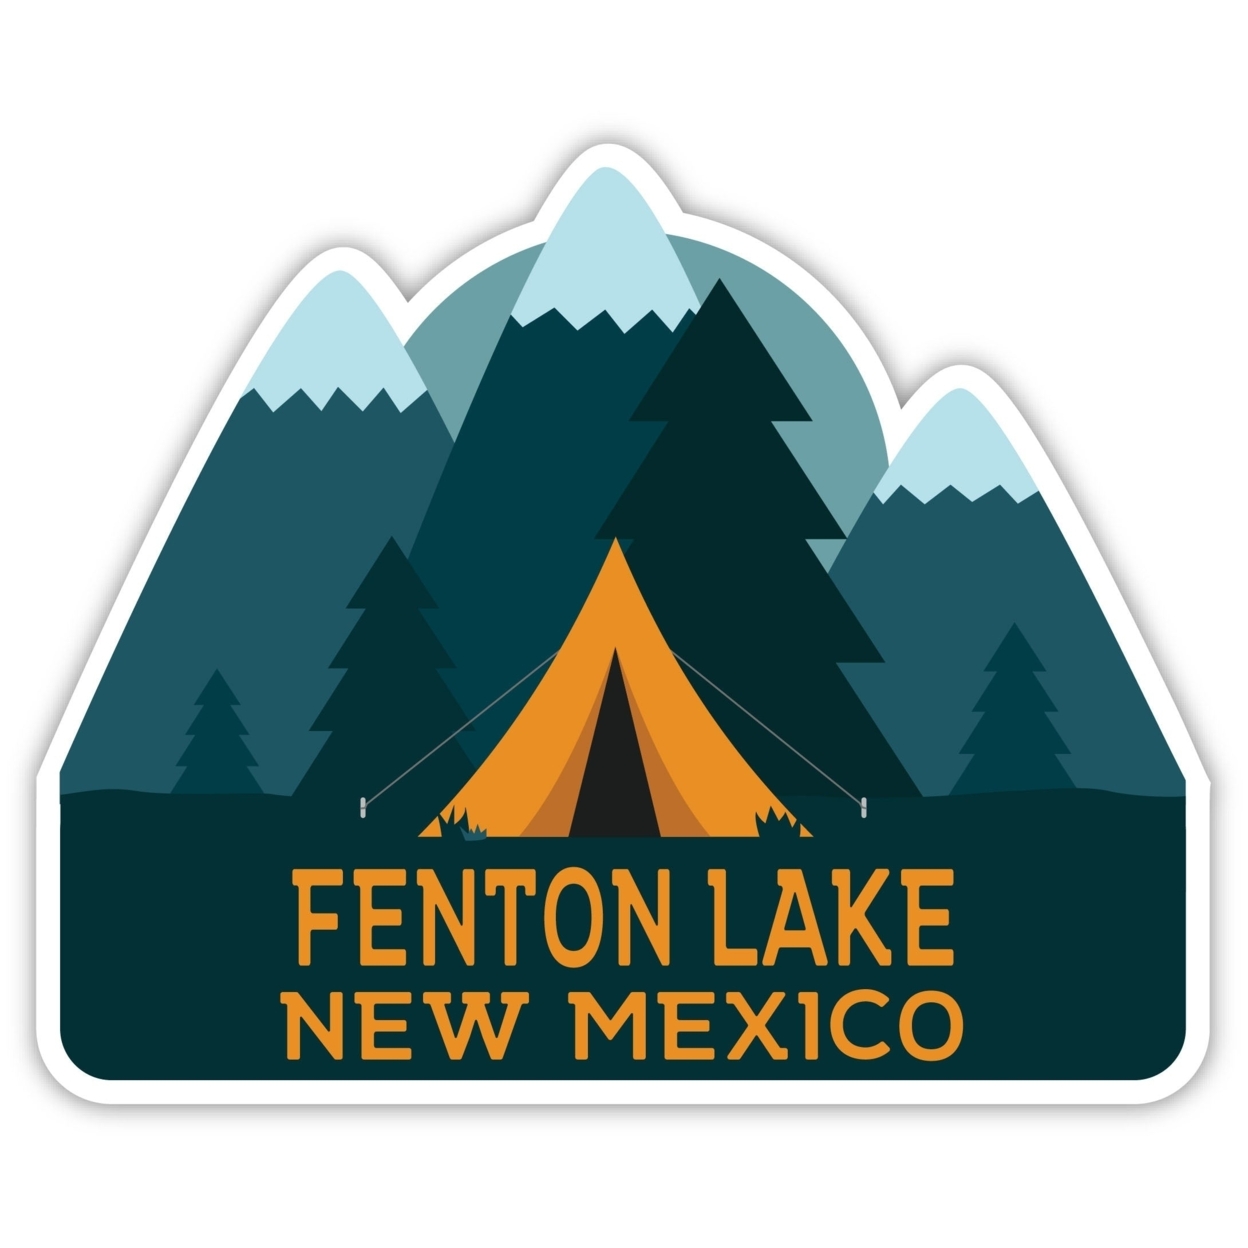 Fenton Lake New Mexico Souvenir Decorative Stickers (Choose Theme And Size) - 4-Pack, 12-Inch, Tent